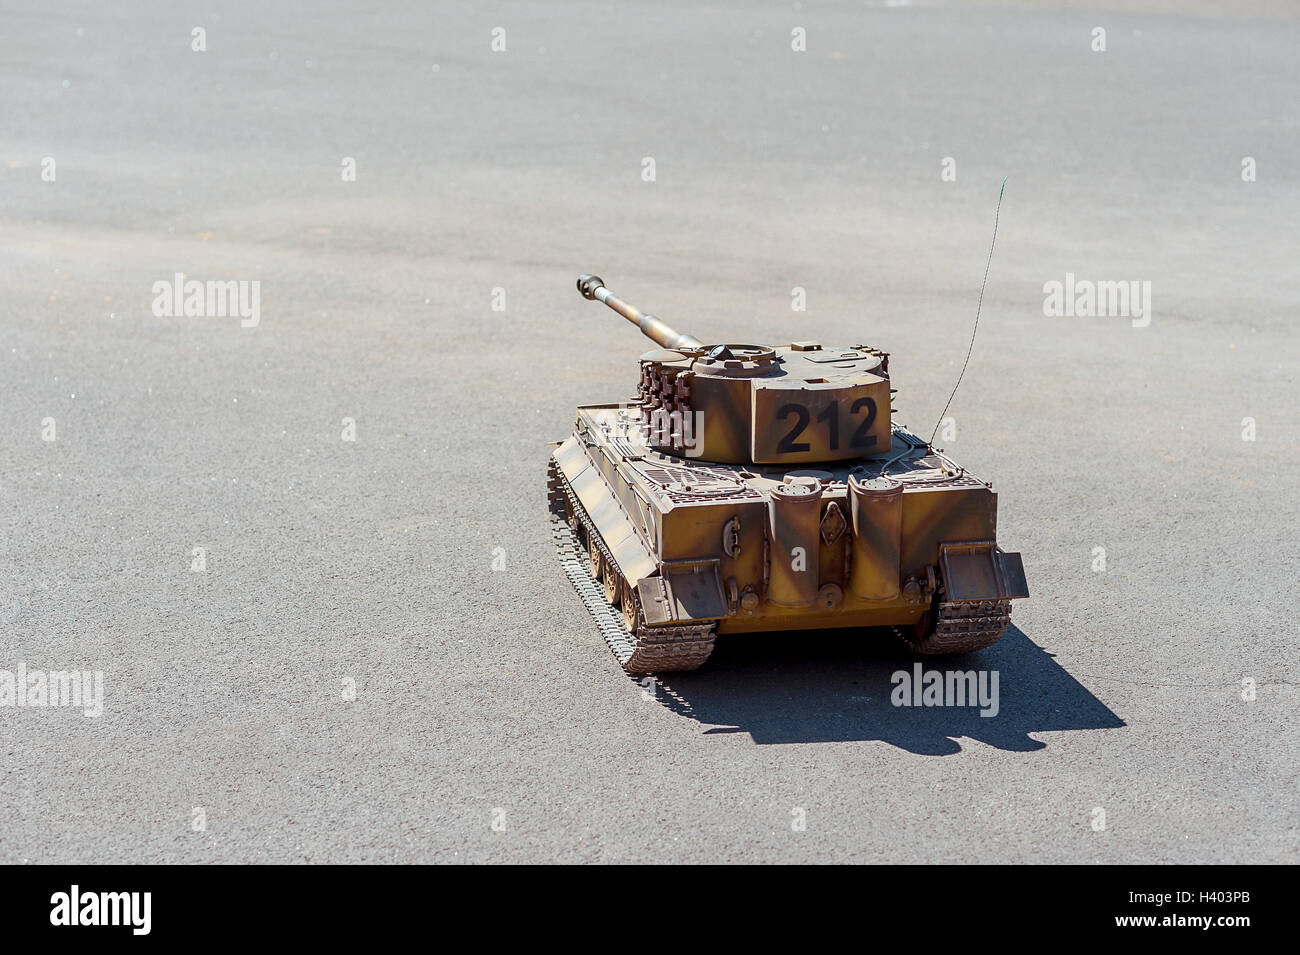 miniature model of the German heavy tank Tiger , a the Second World War, on the pavement, Stock Photo